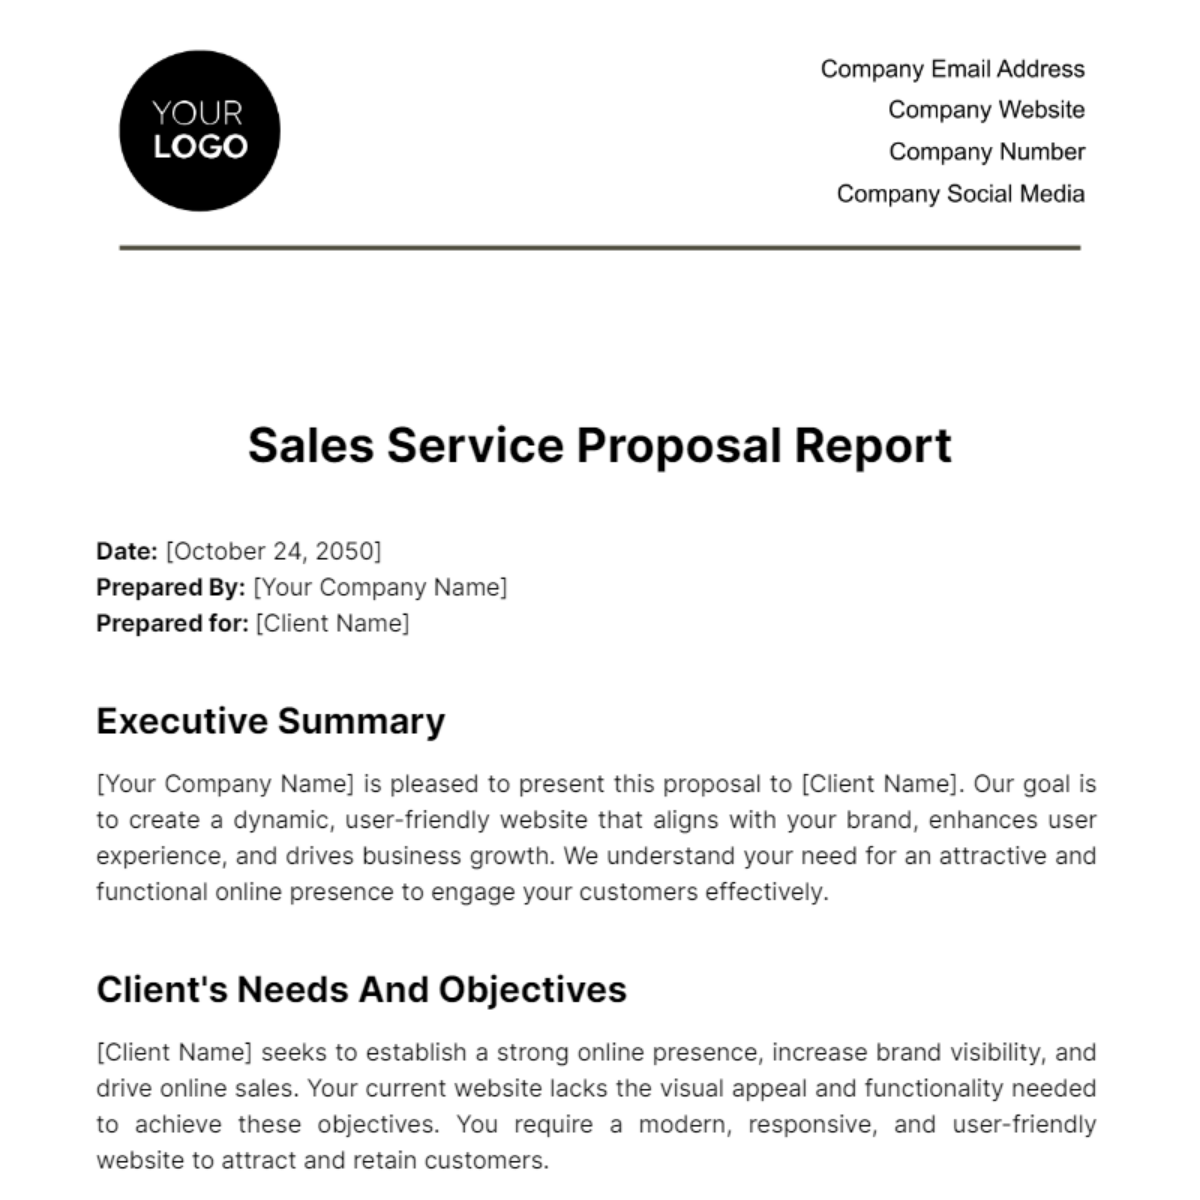 Free Sales Service Proposal Report Template